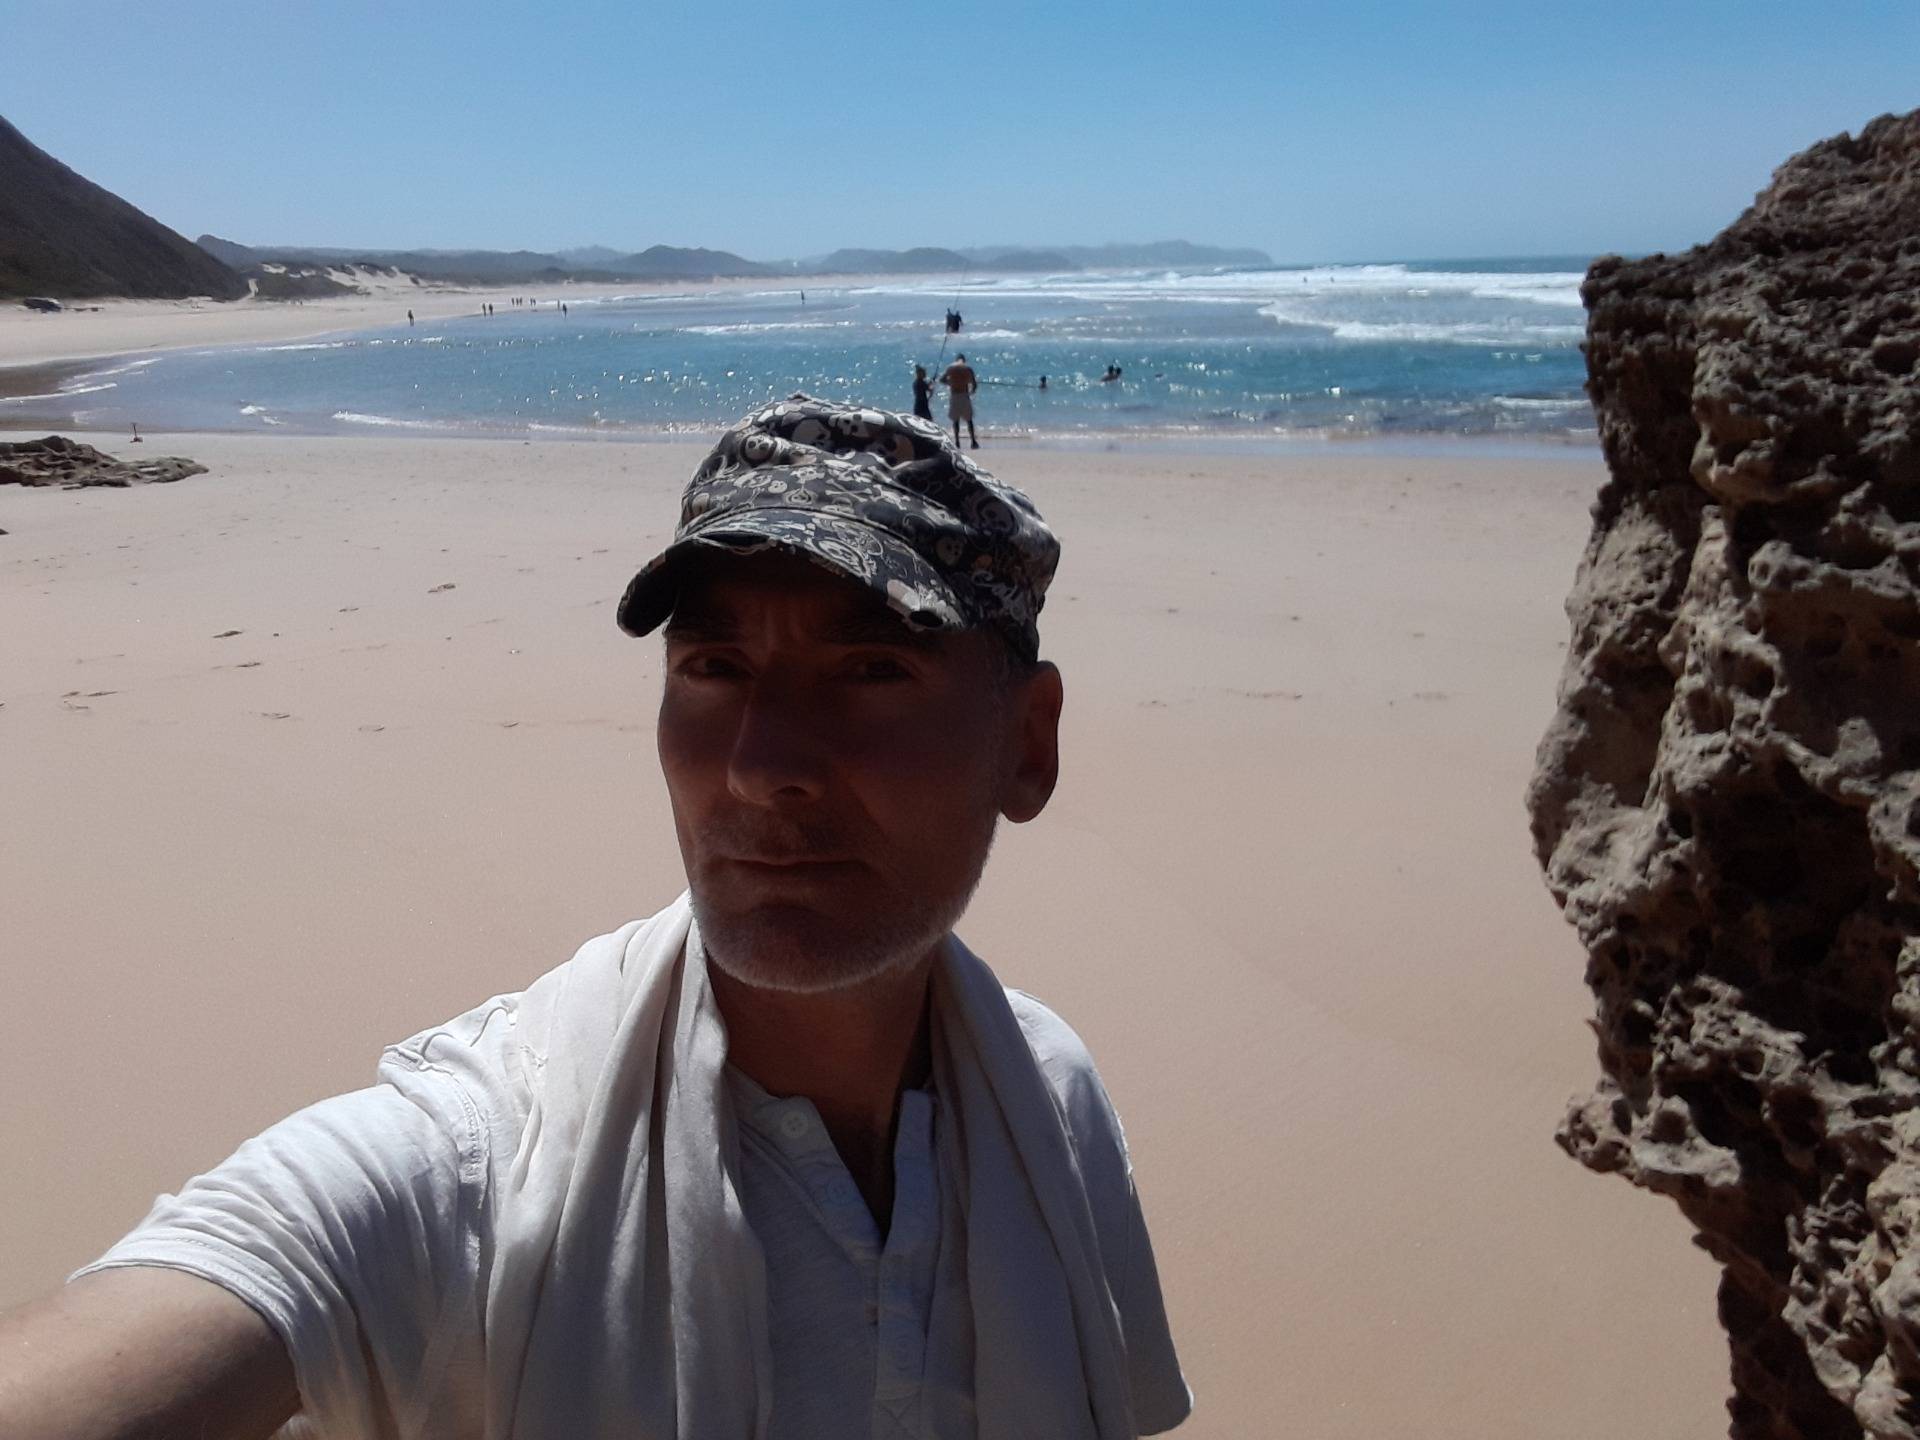 Exploring Gericke’s Point beach on the Garden Route south Cape coast of Africa 